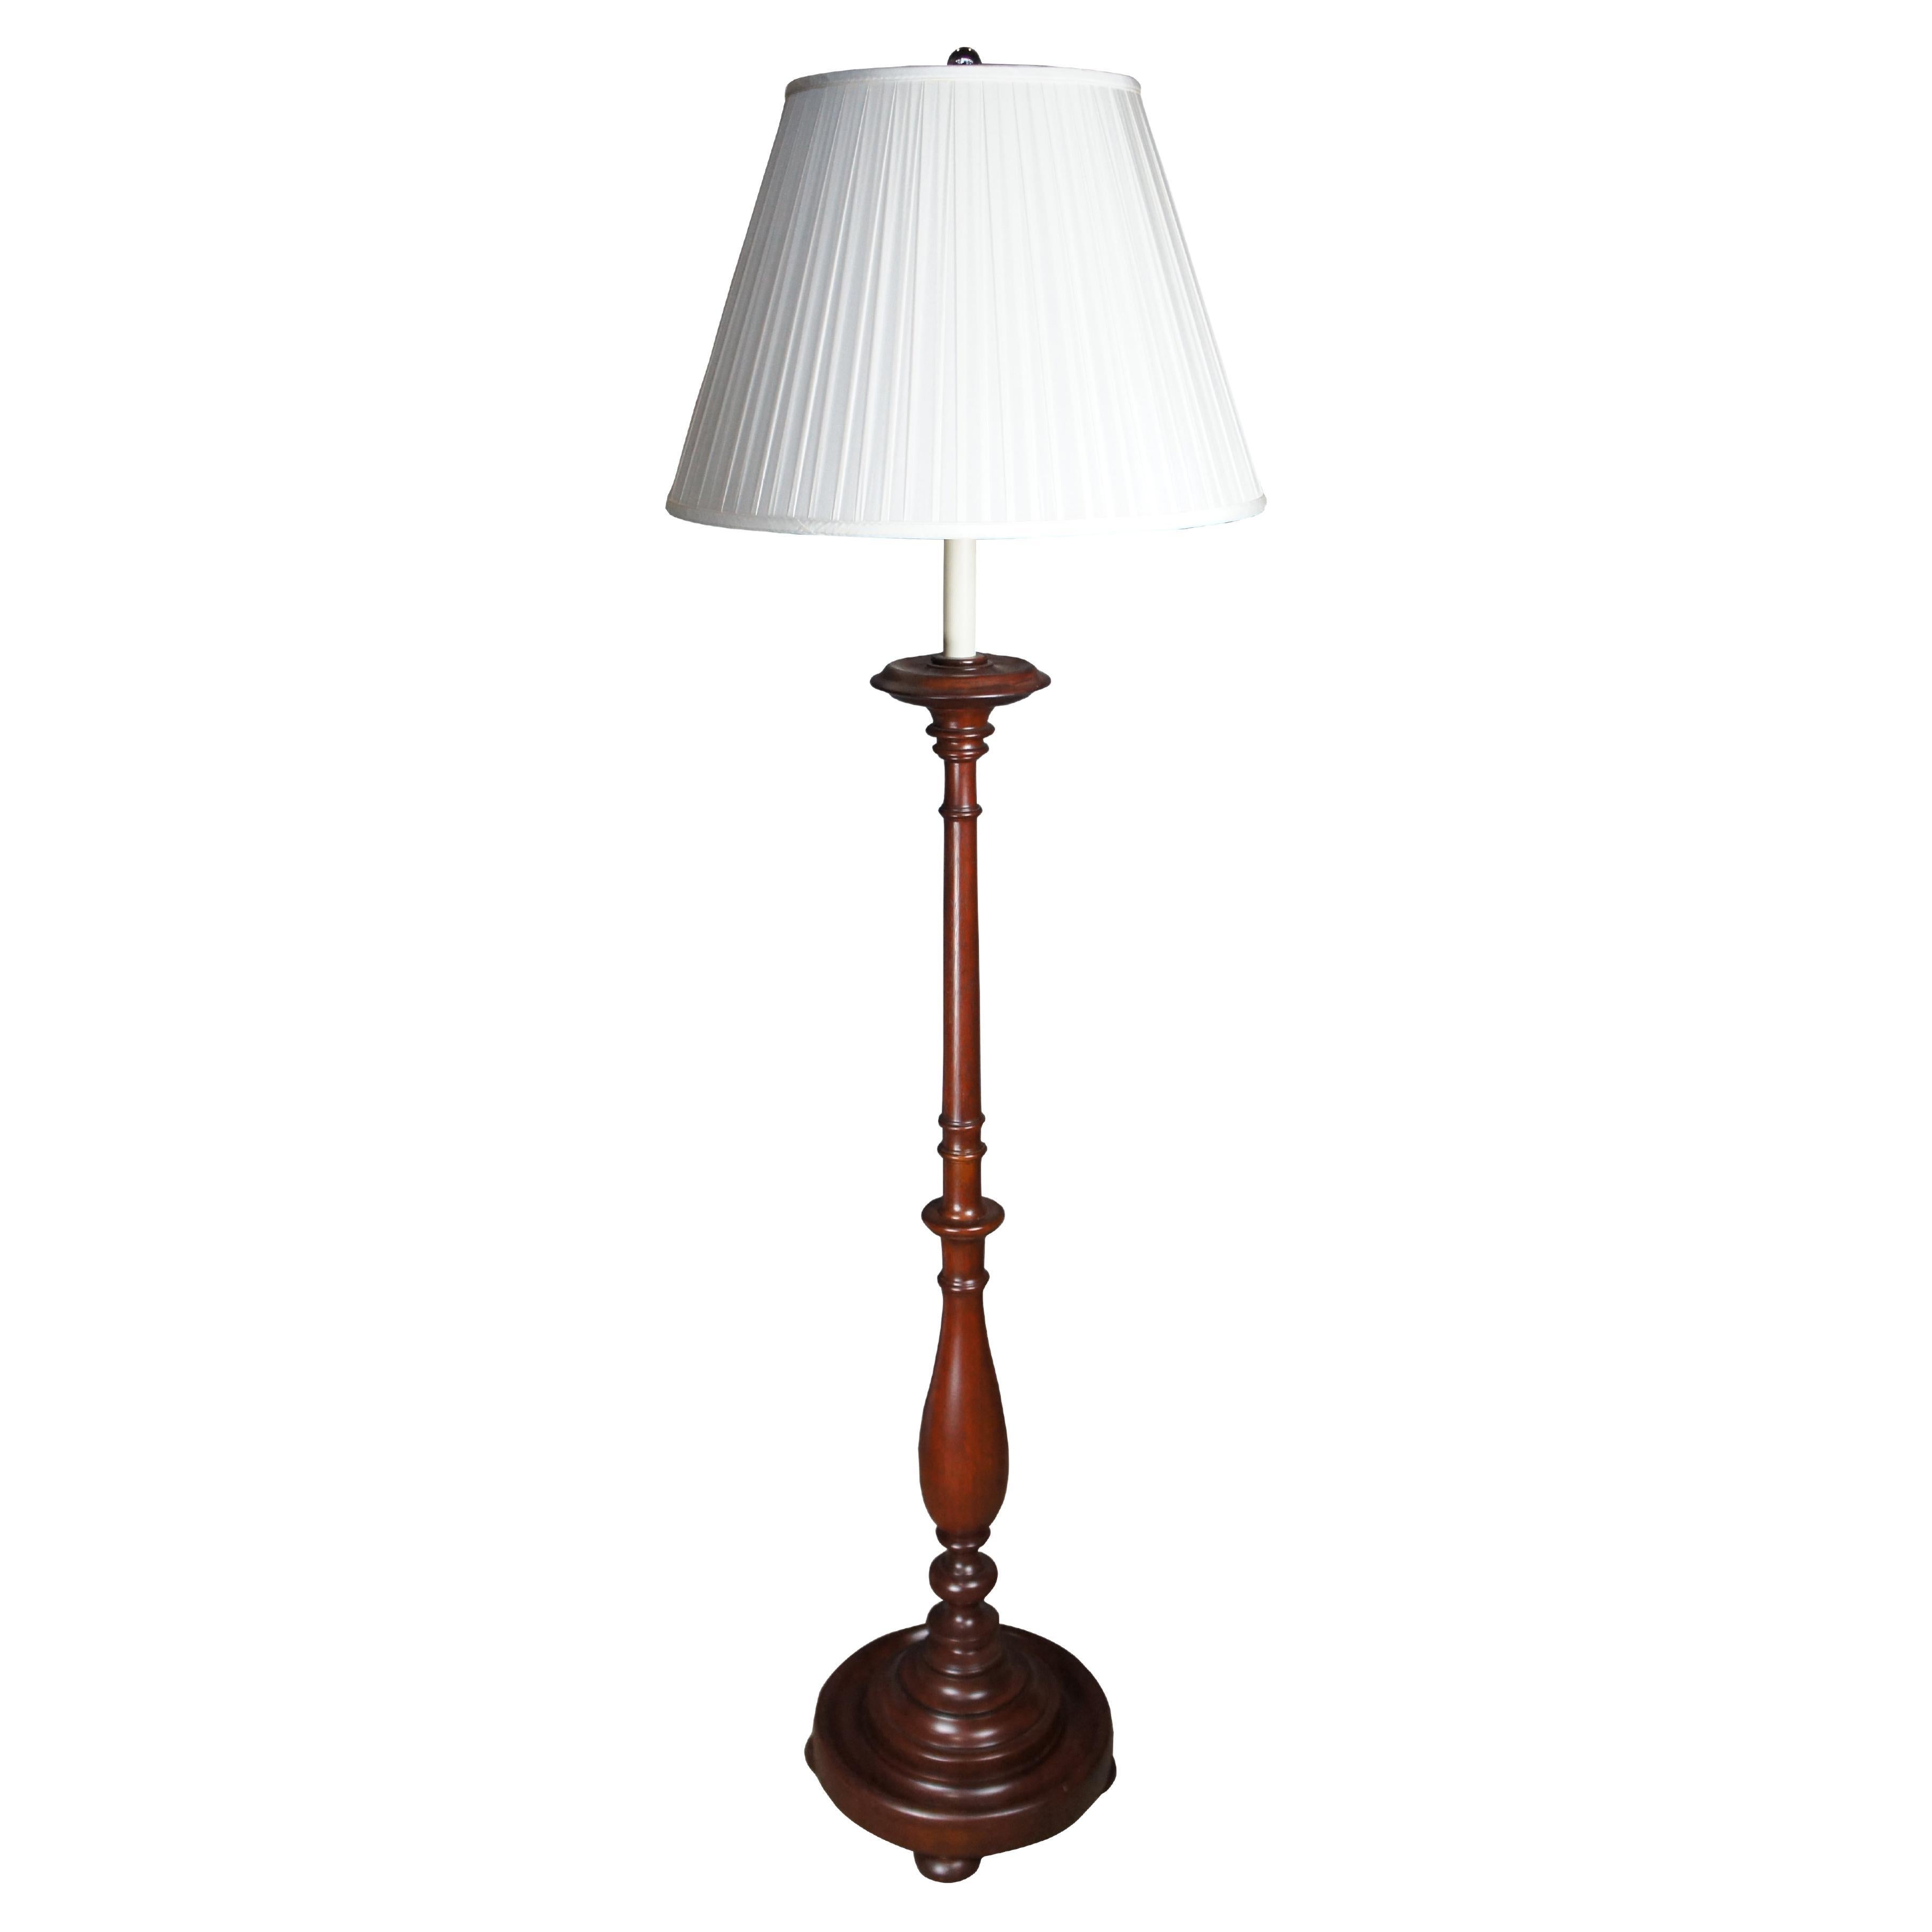 Ralph Lauren Traditional Mahogany Candle Stand Floor Lamp Adjustable Height 68" (lampe à pied traditionnelle en acajou)